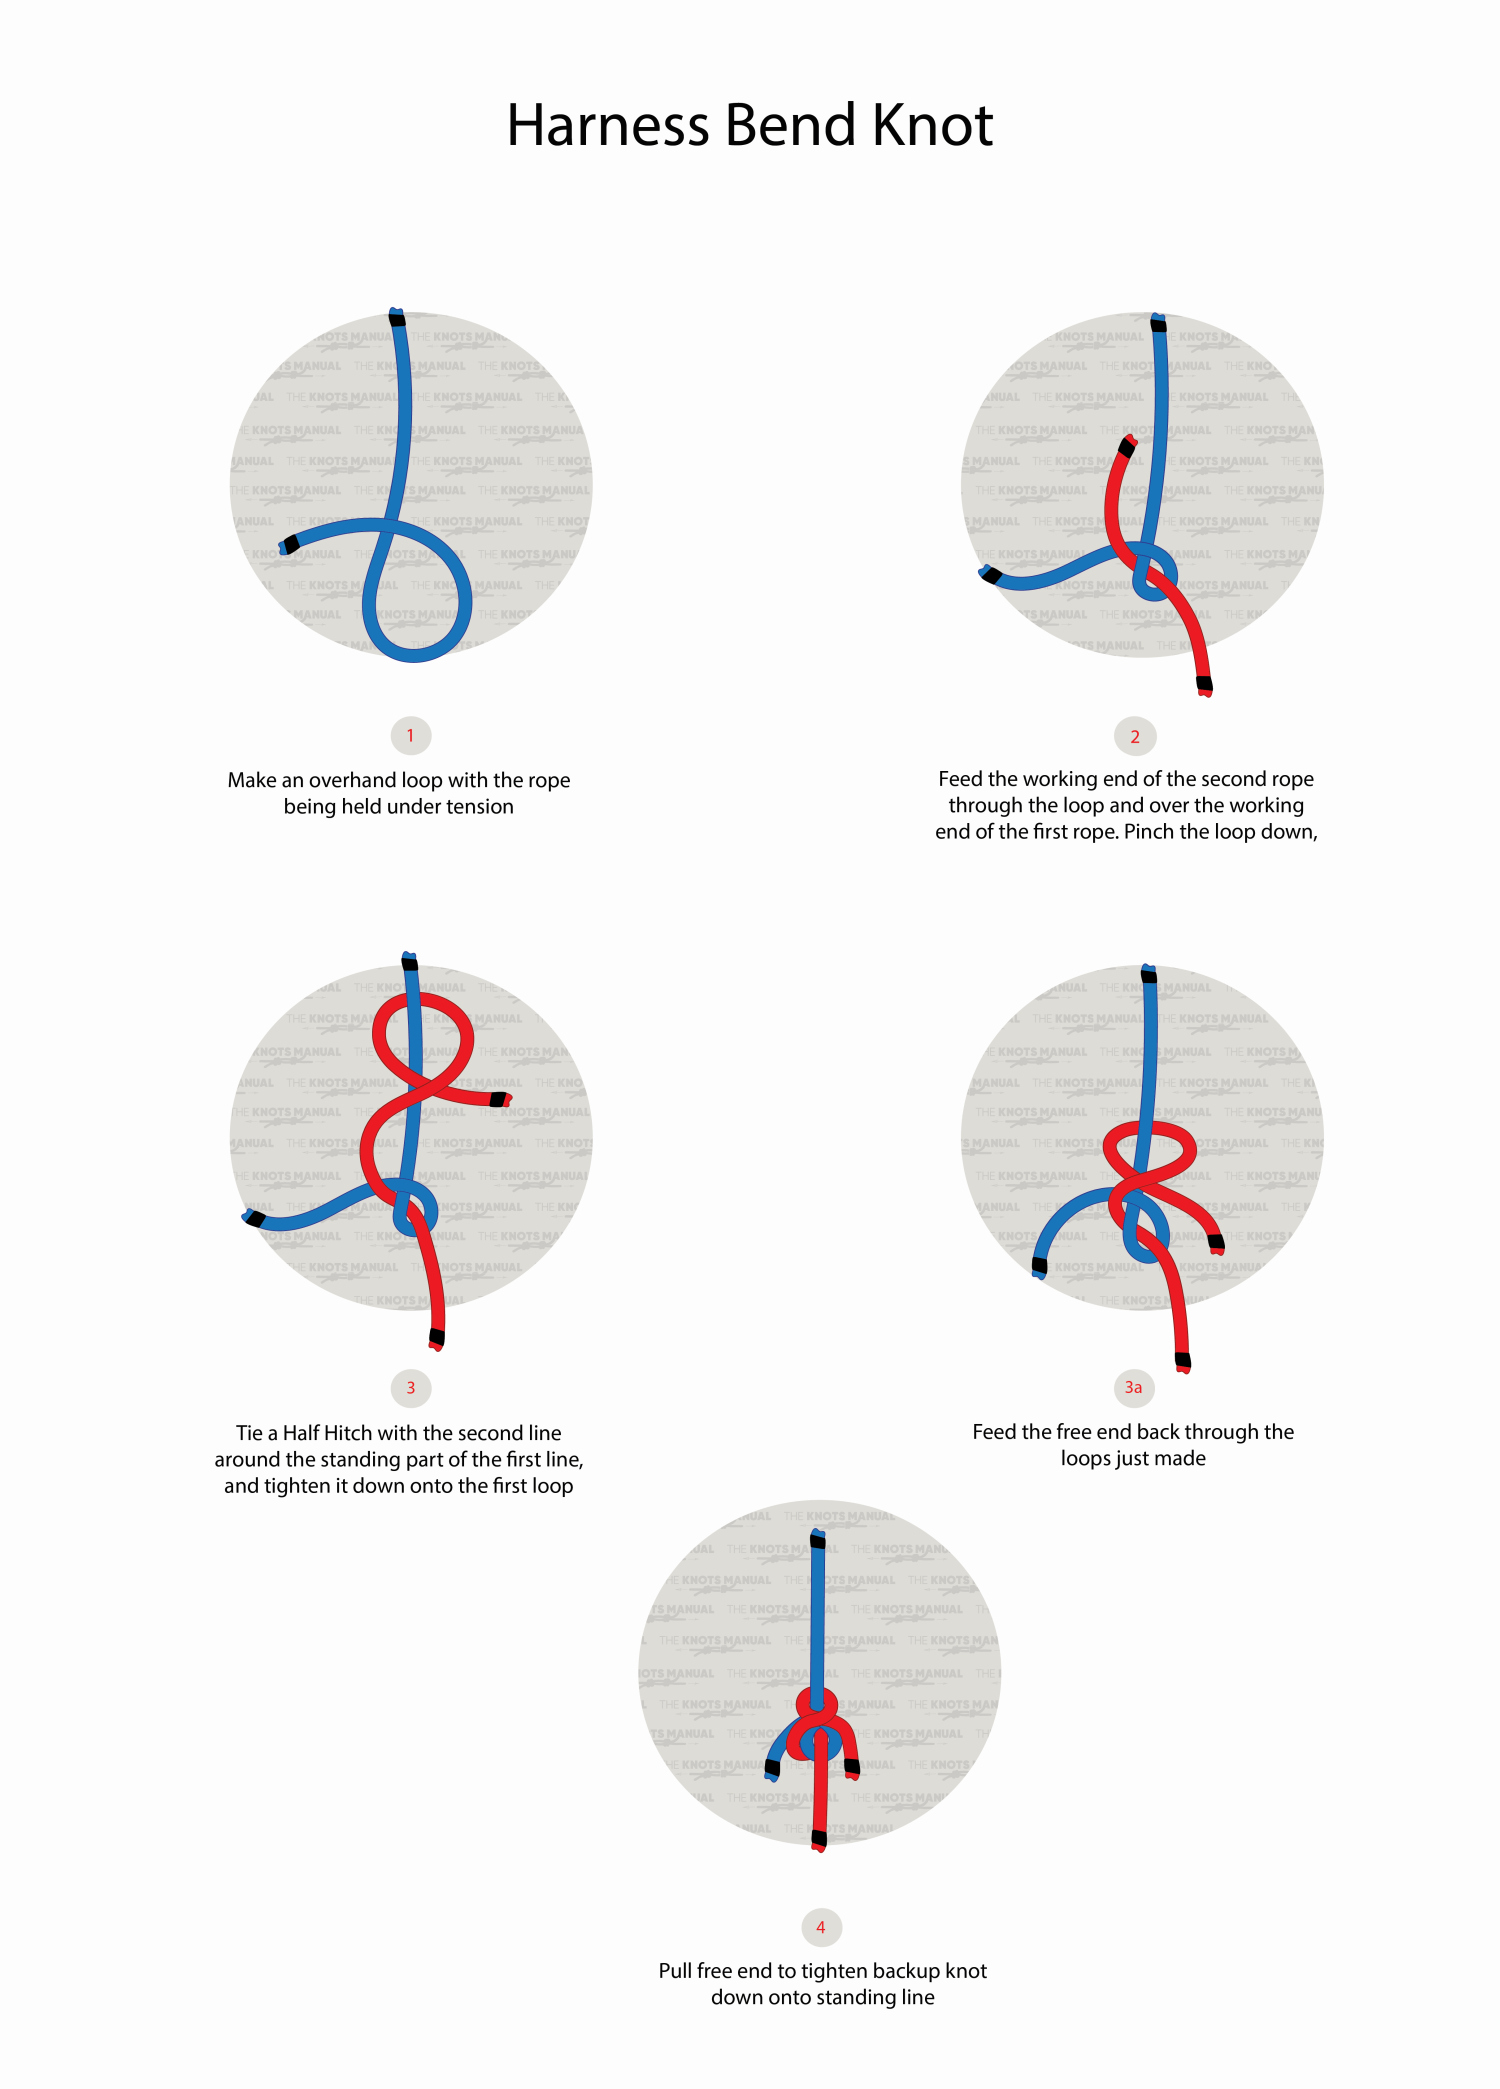 How to Tie a Harness Bend